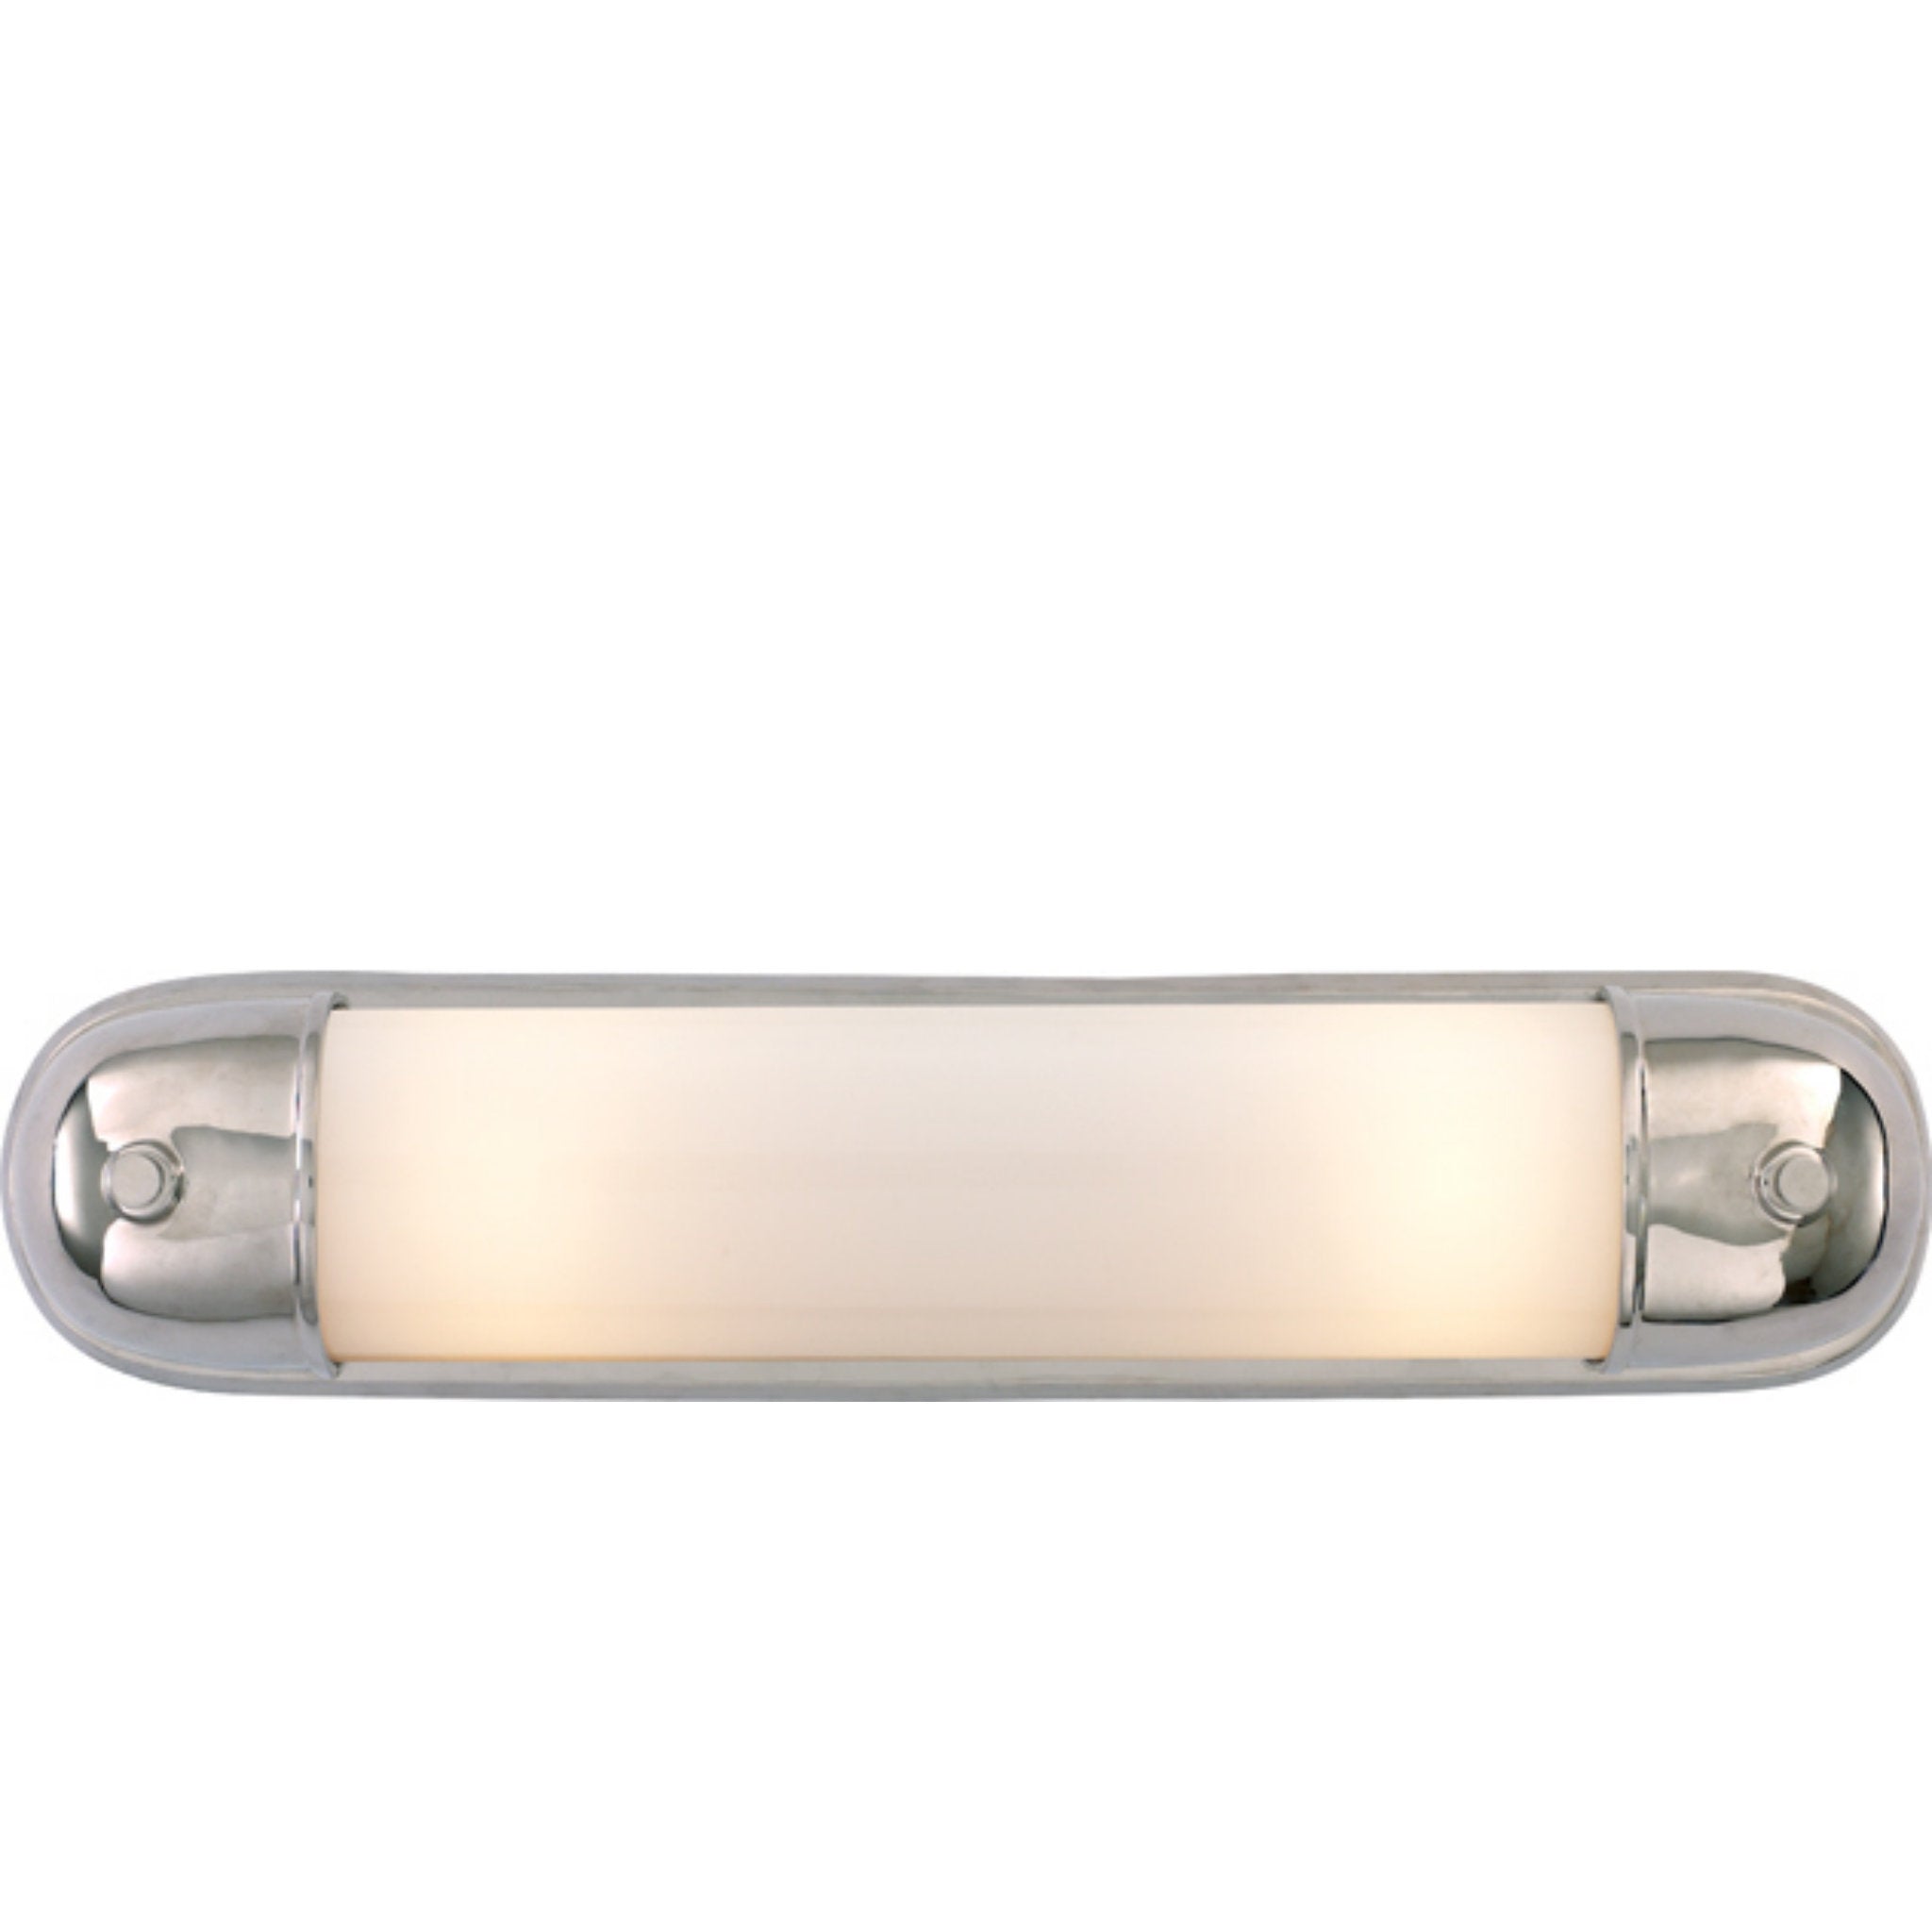 Thomas O'Brien Selecta Long Sconce in Chrome with White Glass